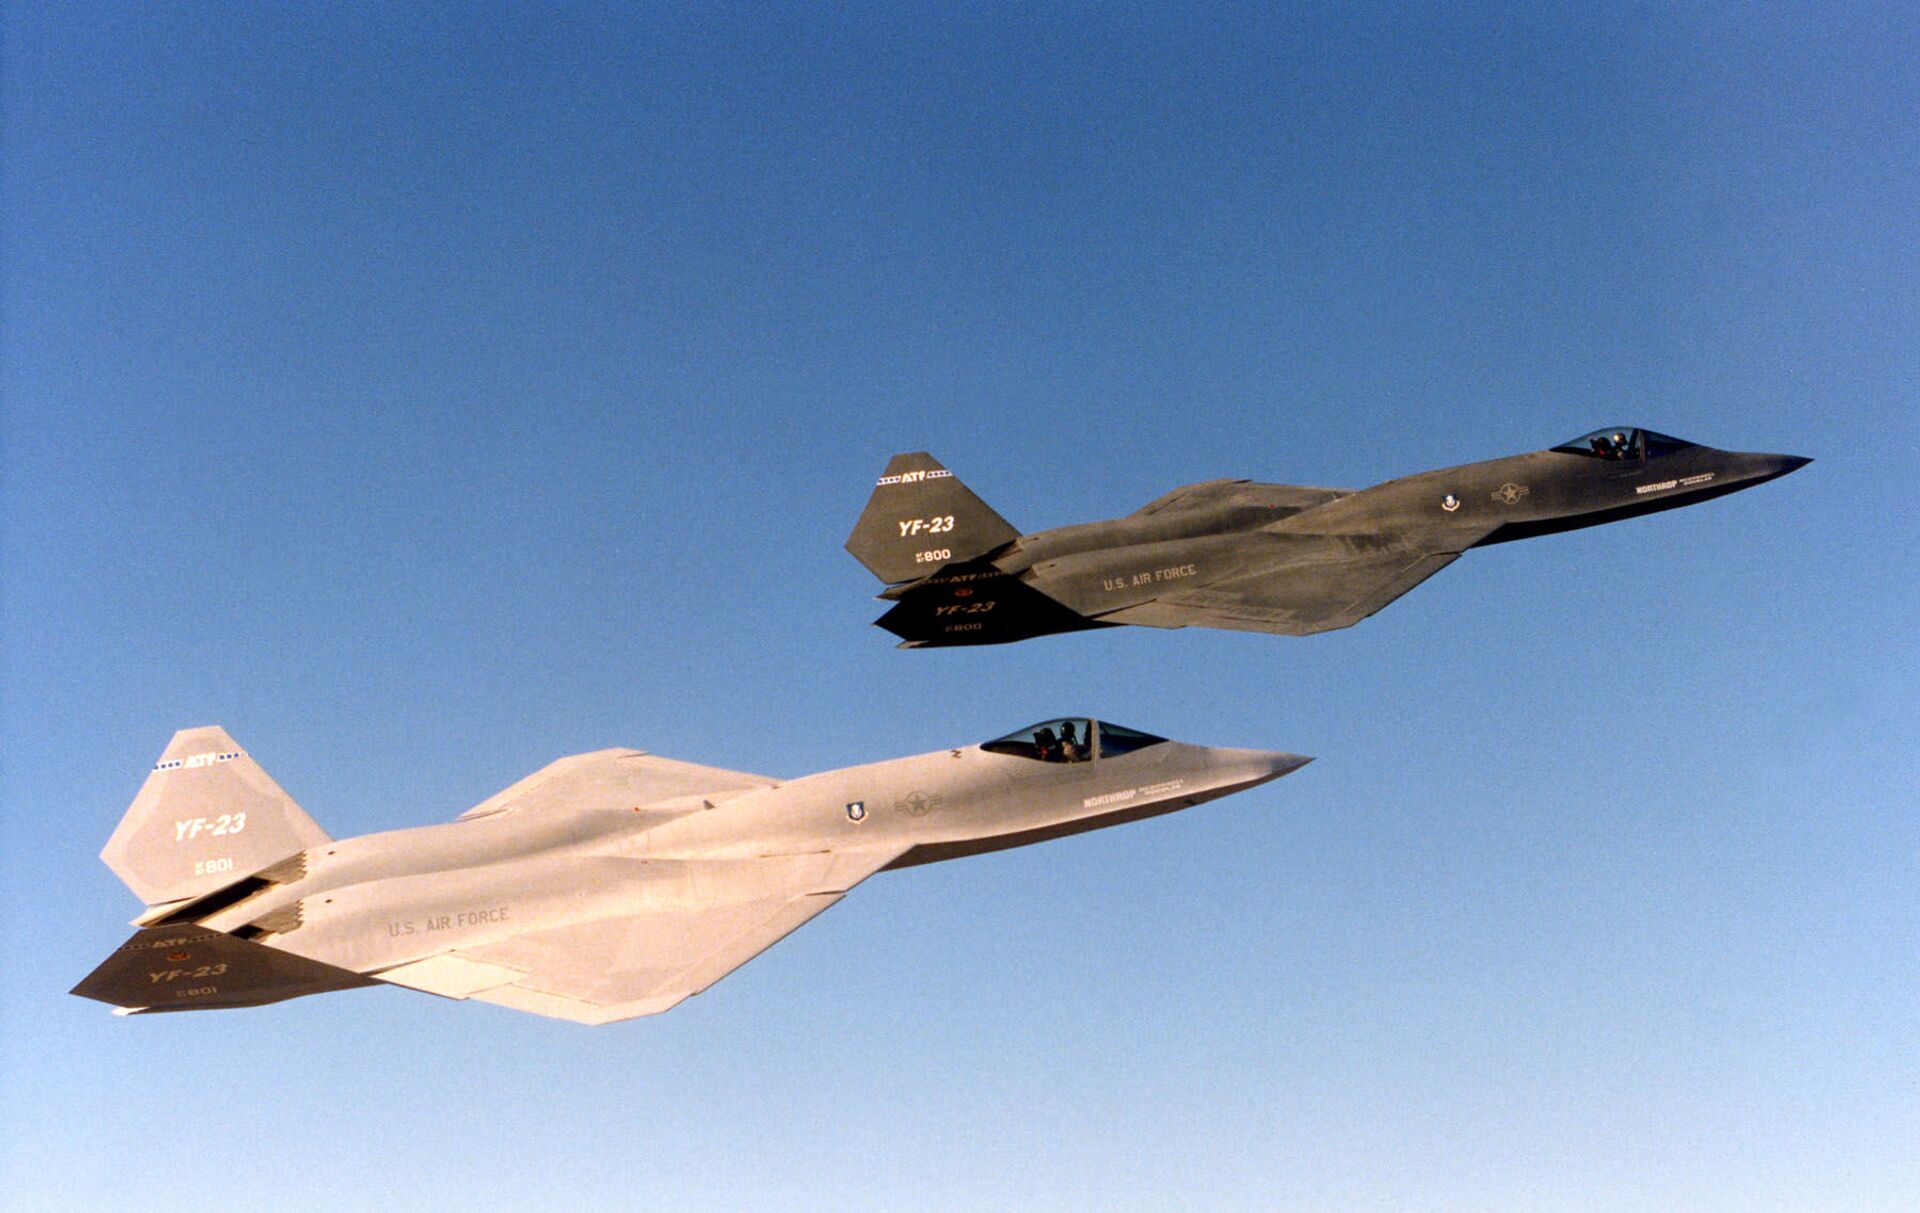 The two Northrop-McDonnell Douglas YF-23 prototypes in flight. The aircraft on display at the National Museum of the United States Air Force is the darker one on the right. - Sputnik International, 1920, 07.09.2021